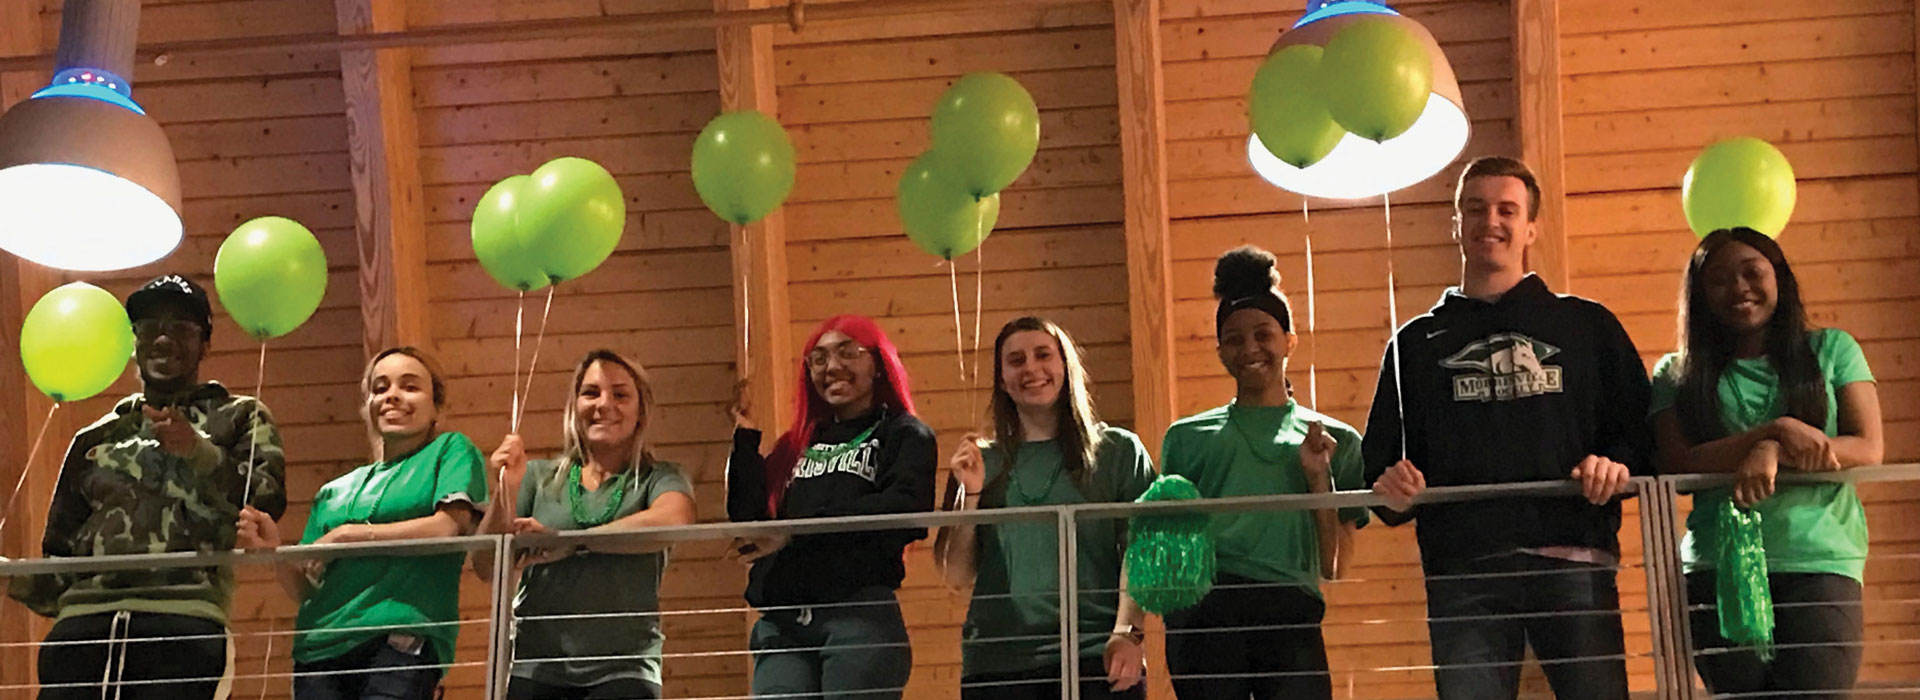 A group of students holding green balloons looking out over a railing